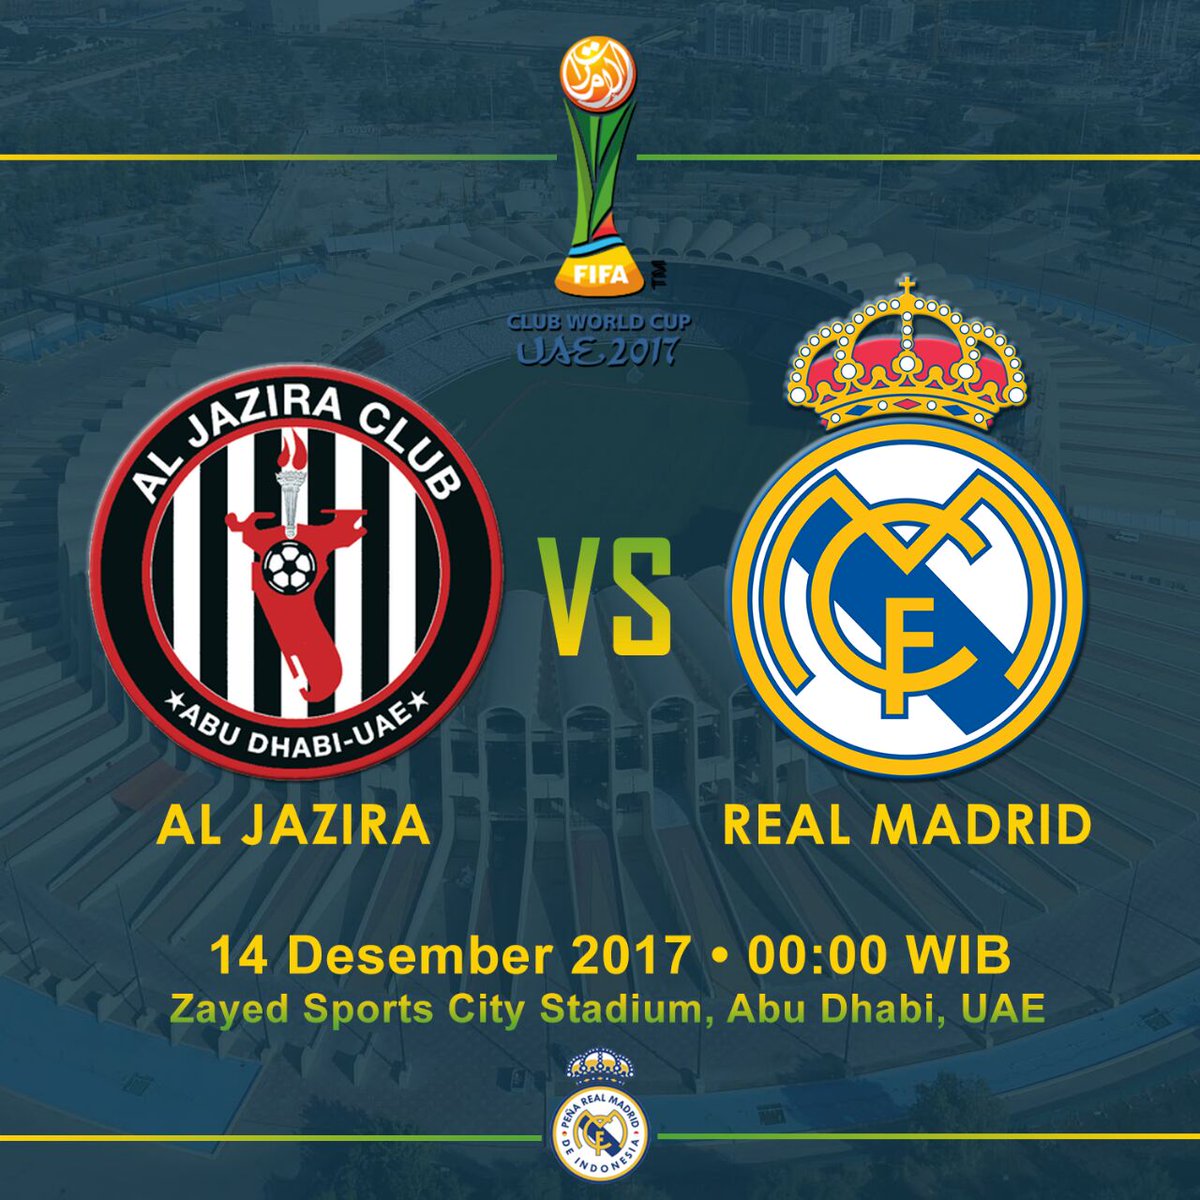 Pea Real Madrid De Indonesia On Twitter REAL MADRID DAY